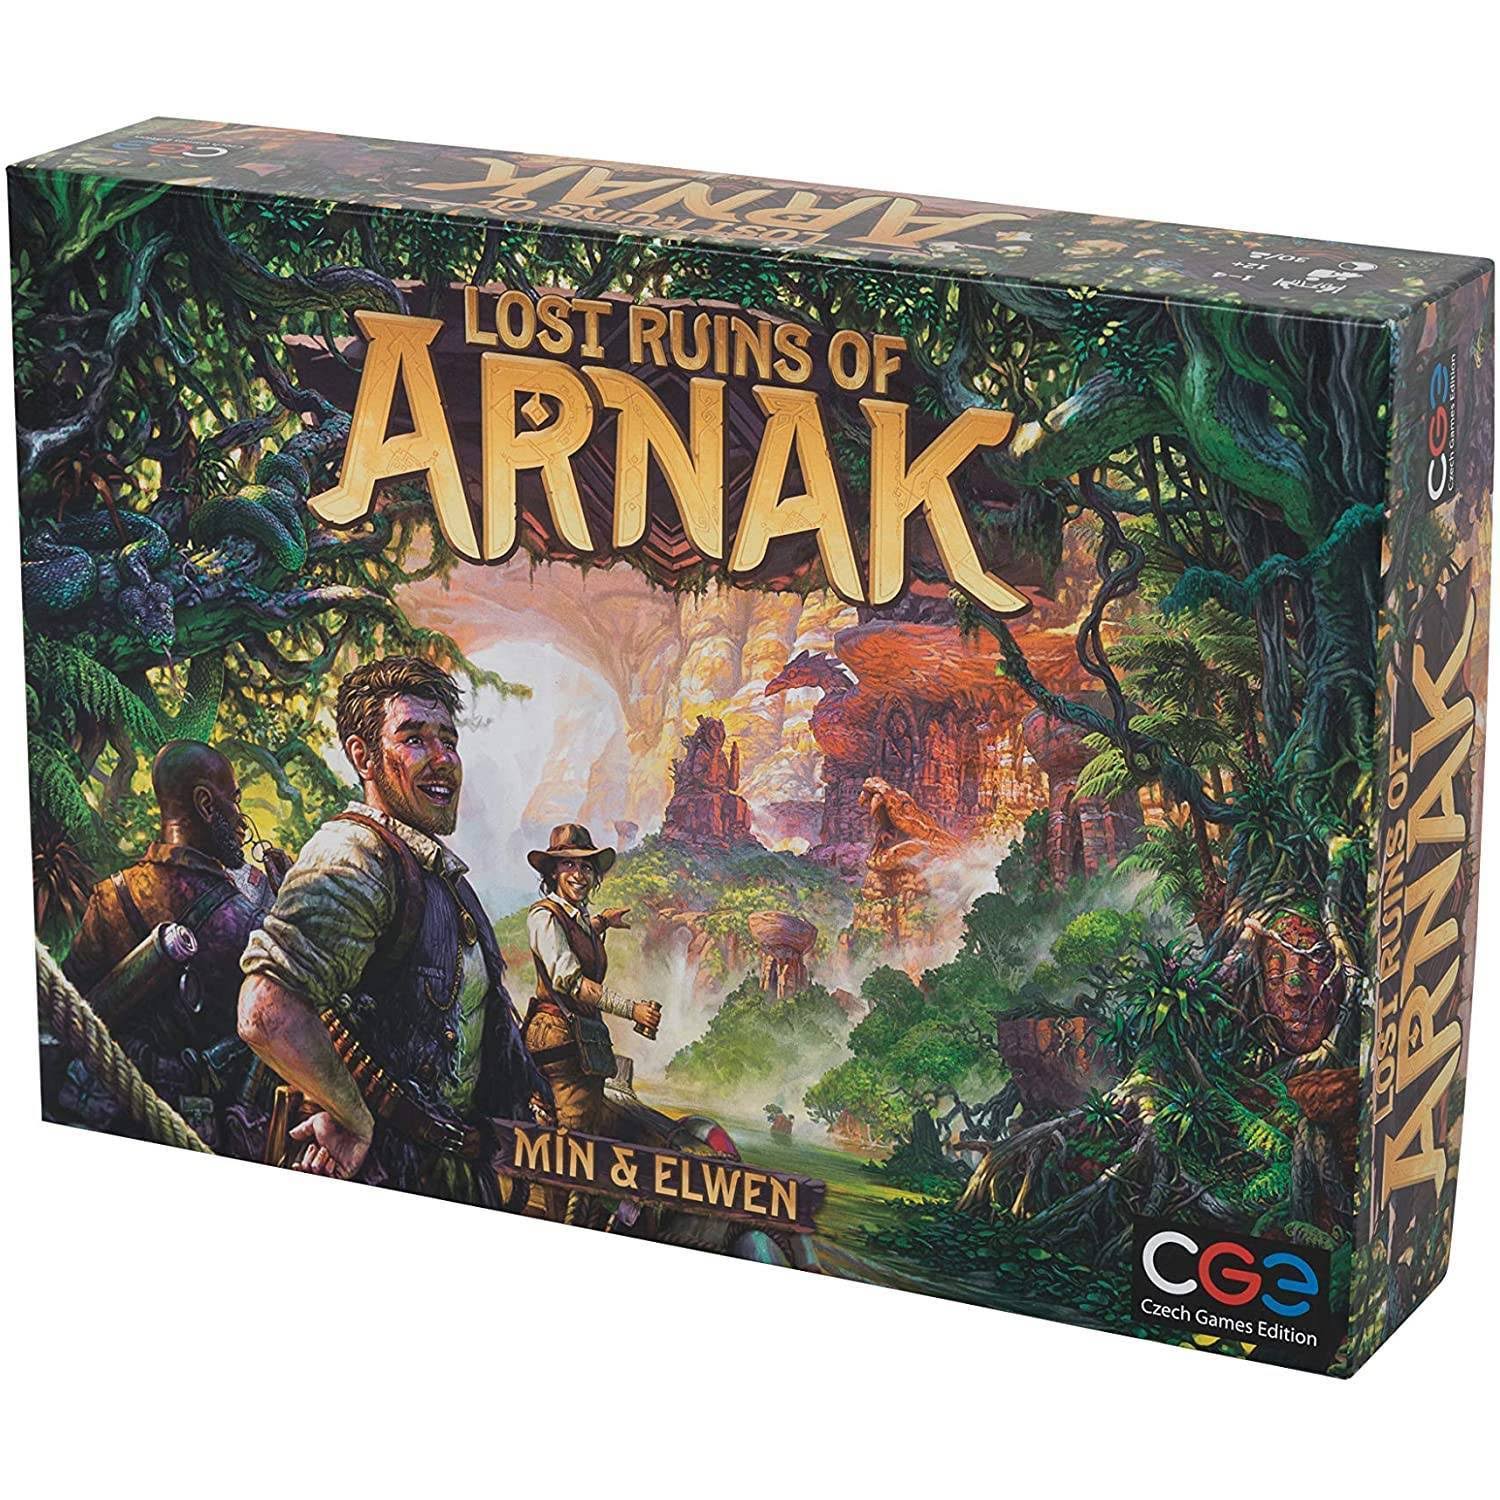 Czech Games Edition - Lost Ruins of Arnak - Board Game